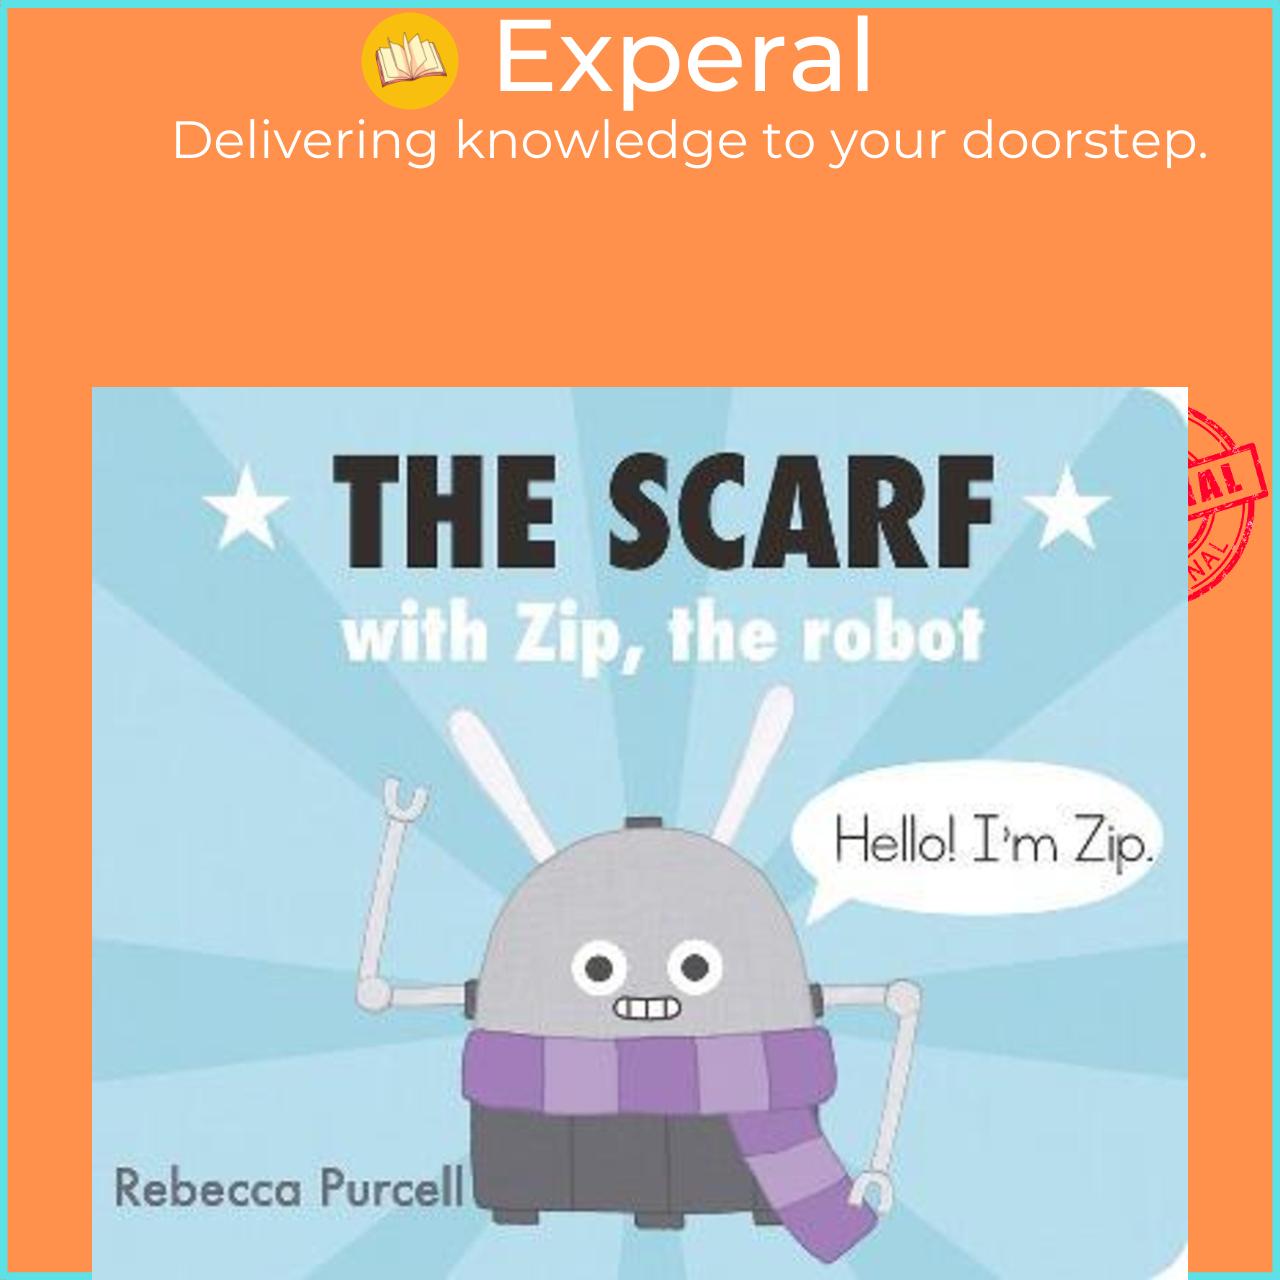 Sách - The Scarf, with Zip the Robot by Rebecca Purcell (paperback)